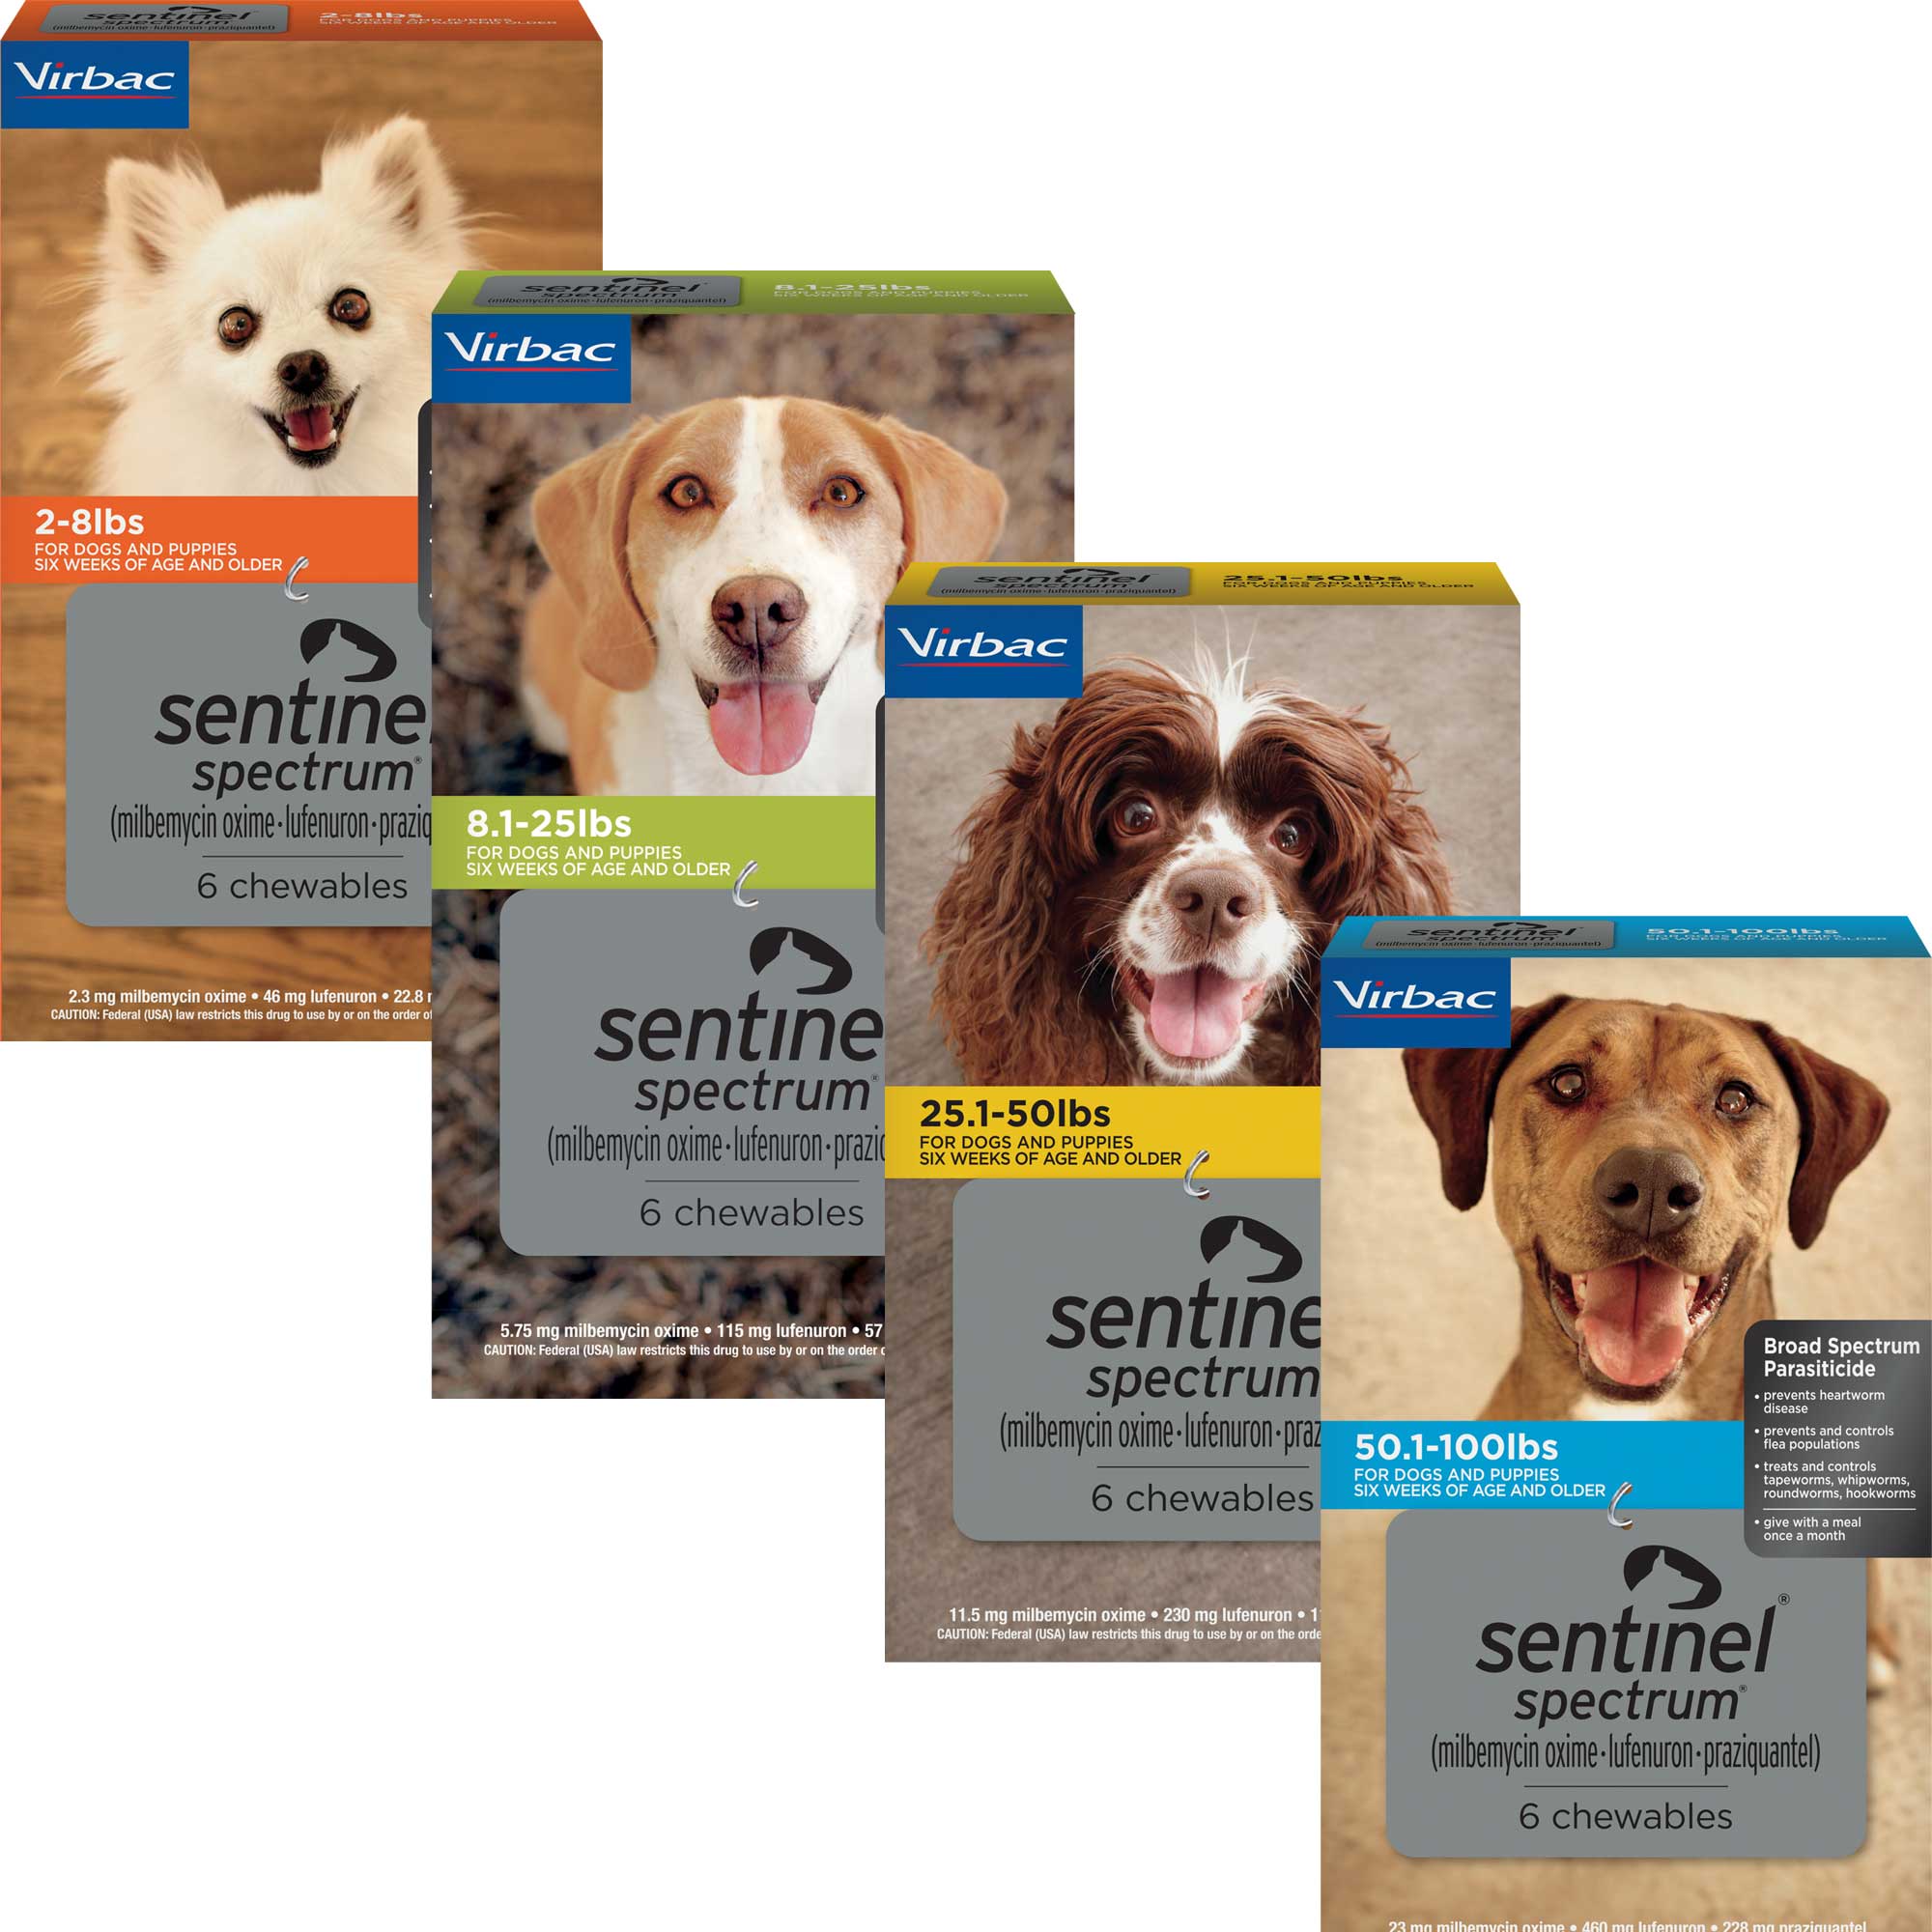 bravecto for dogs heartworm